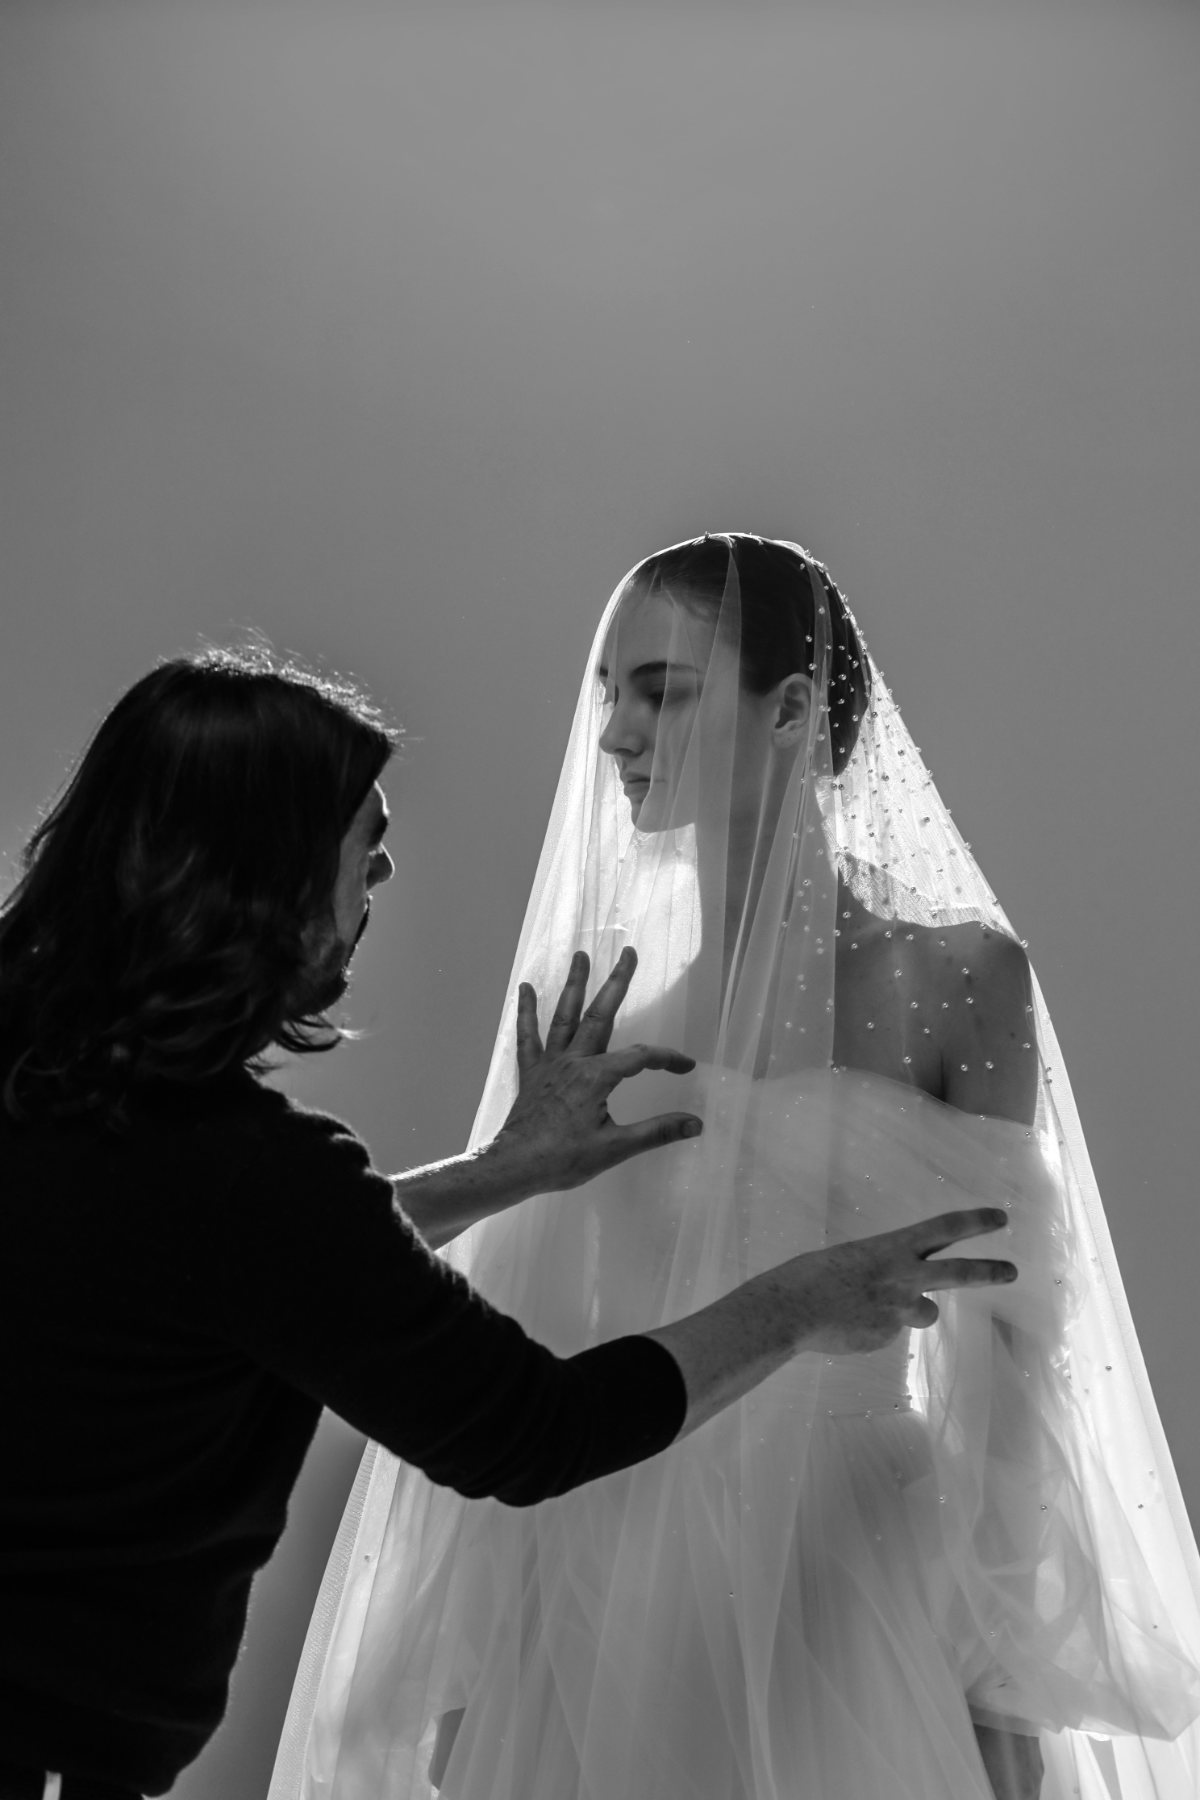 Stephane Rolland Presents His First Bridal Line